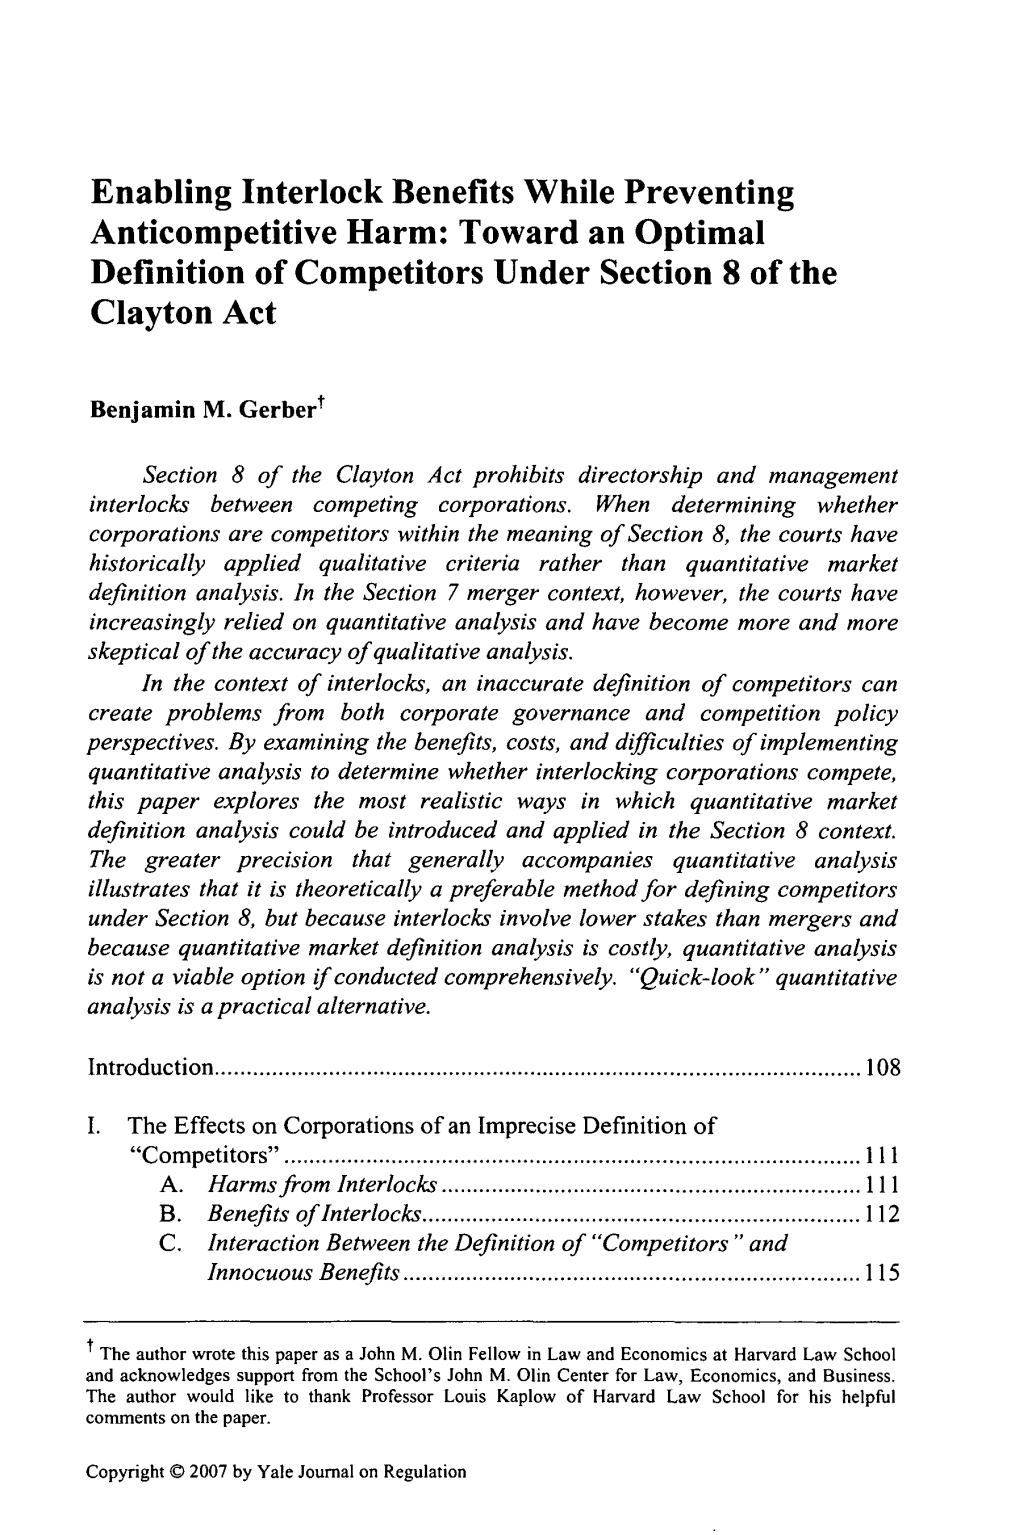 Enabling Interlock Benefits While Preventing Anticompetitive Harm: Toward an Optimal Definition of Competitors Under Section 8 of the Clayton Act